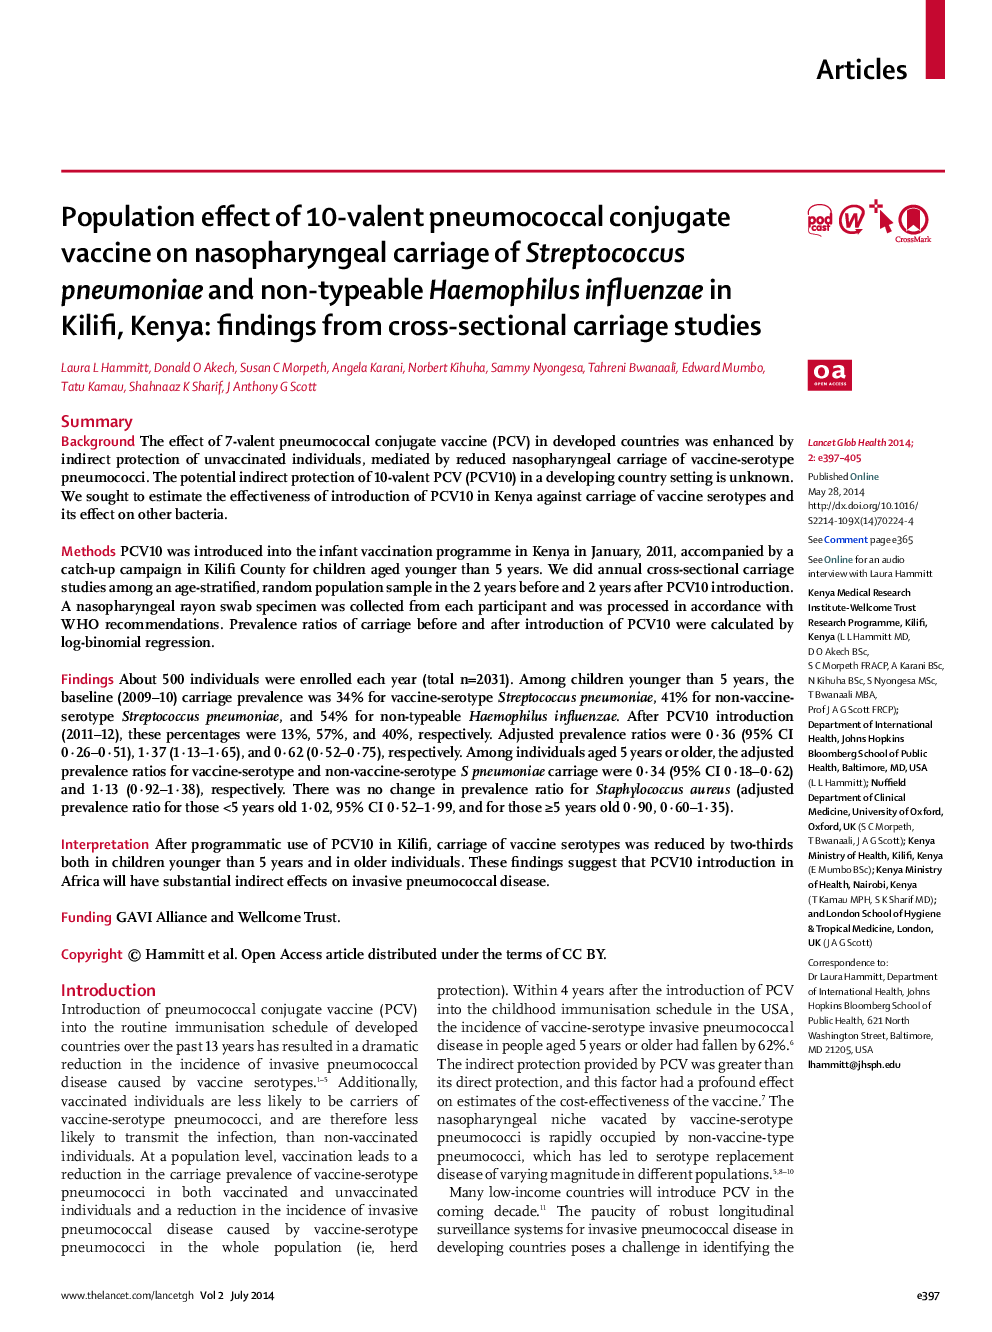 Population effect of 10-valent pneumococcal conjugate vaccine on nasopharyngeal carriage of Streptococcus pneumoniae and non-typeable Haemophilus influenzae in Kilifi, Kenya: findings from cross-sectional carriage studies